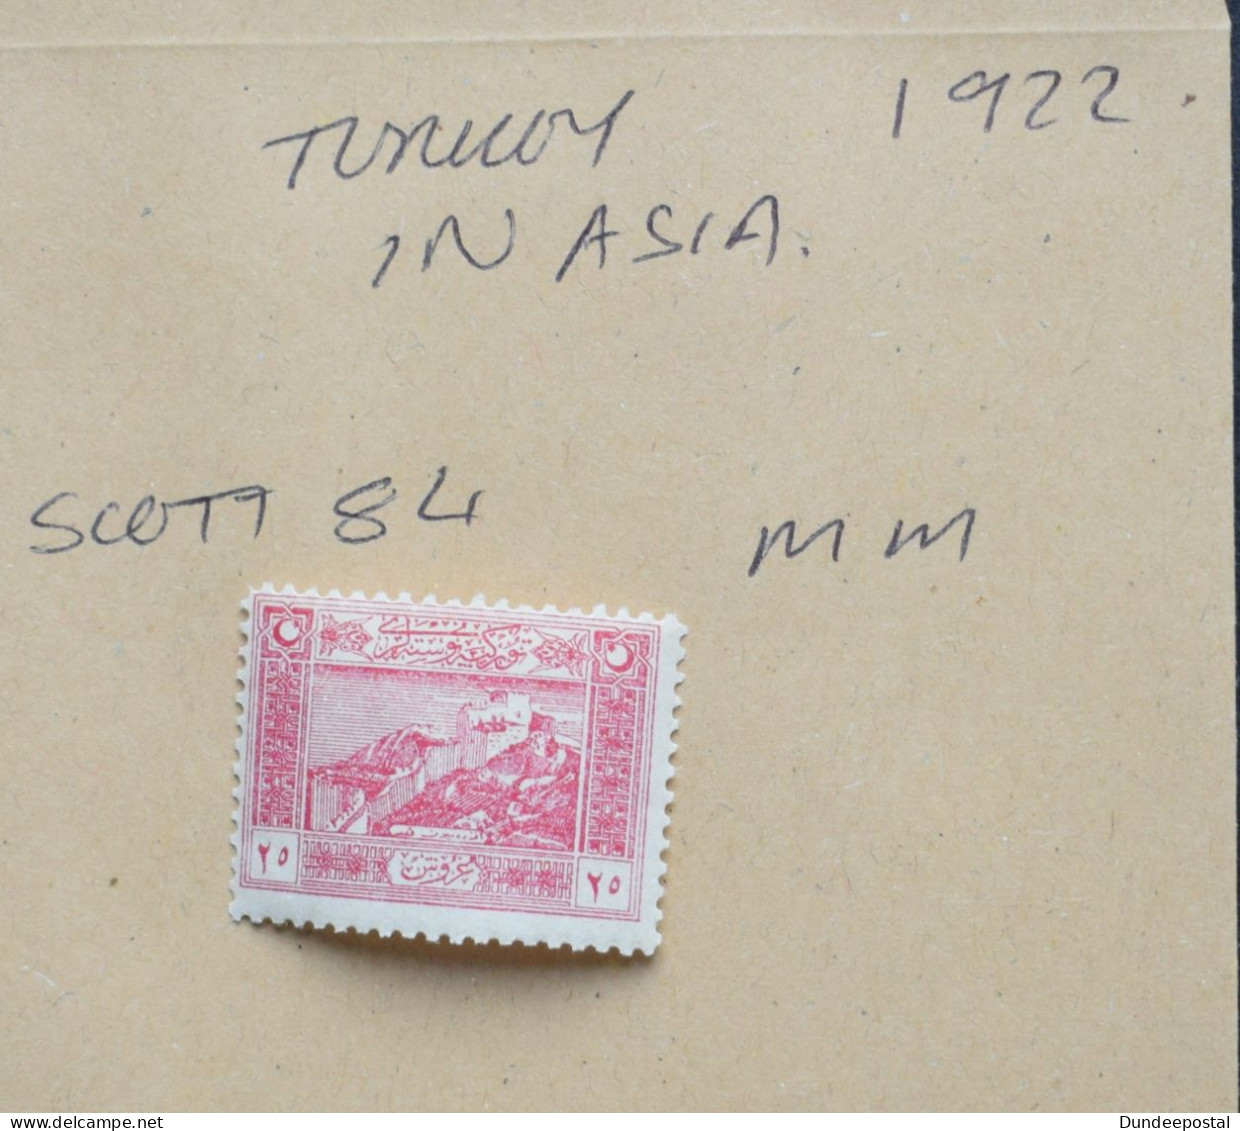 TURKEY In Asia STAMPS Sc84   1922  ~~L@@K~~ - Unused Stamps